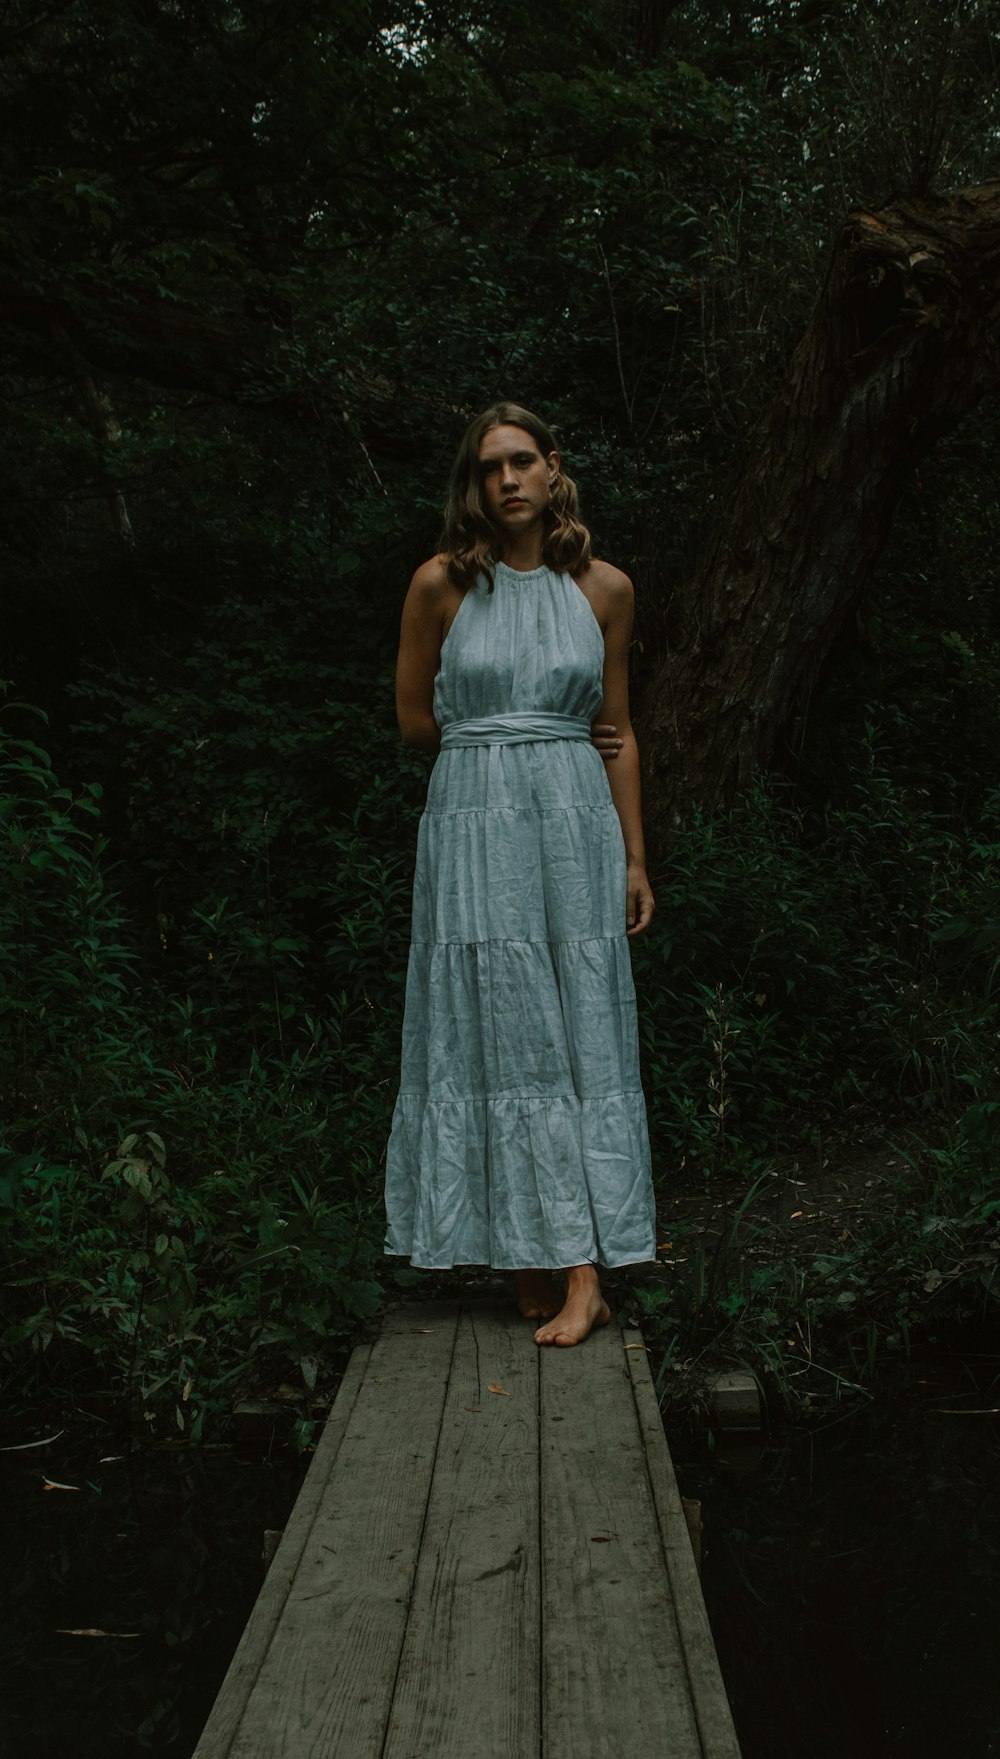 a person in a dress standing on a wooden platform in the woods